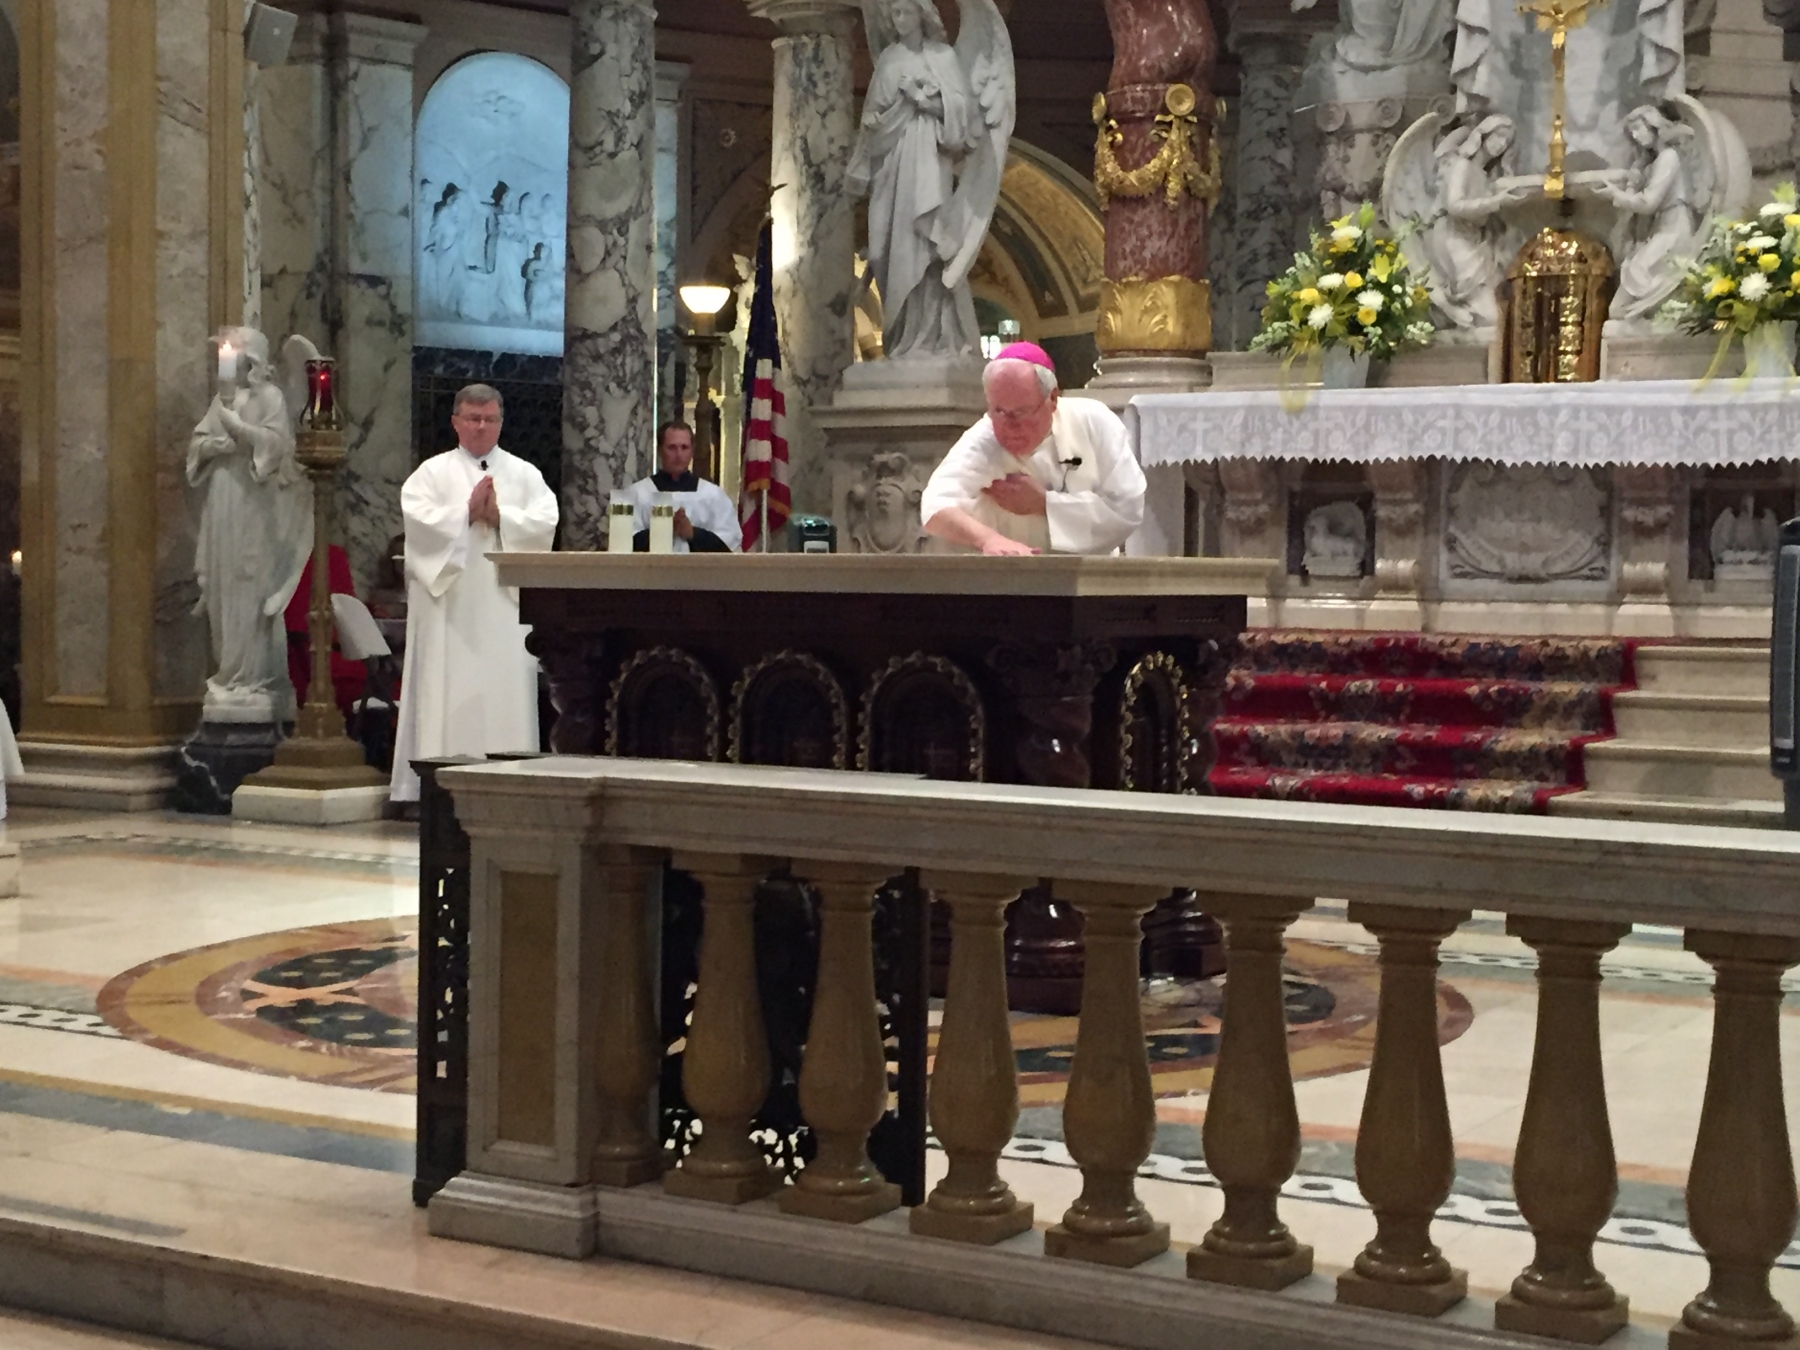 Bishop Richard J. Malone anoints new altar at Our Lady of Victory Basilica